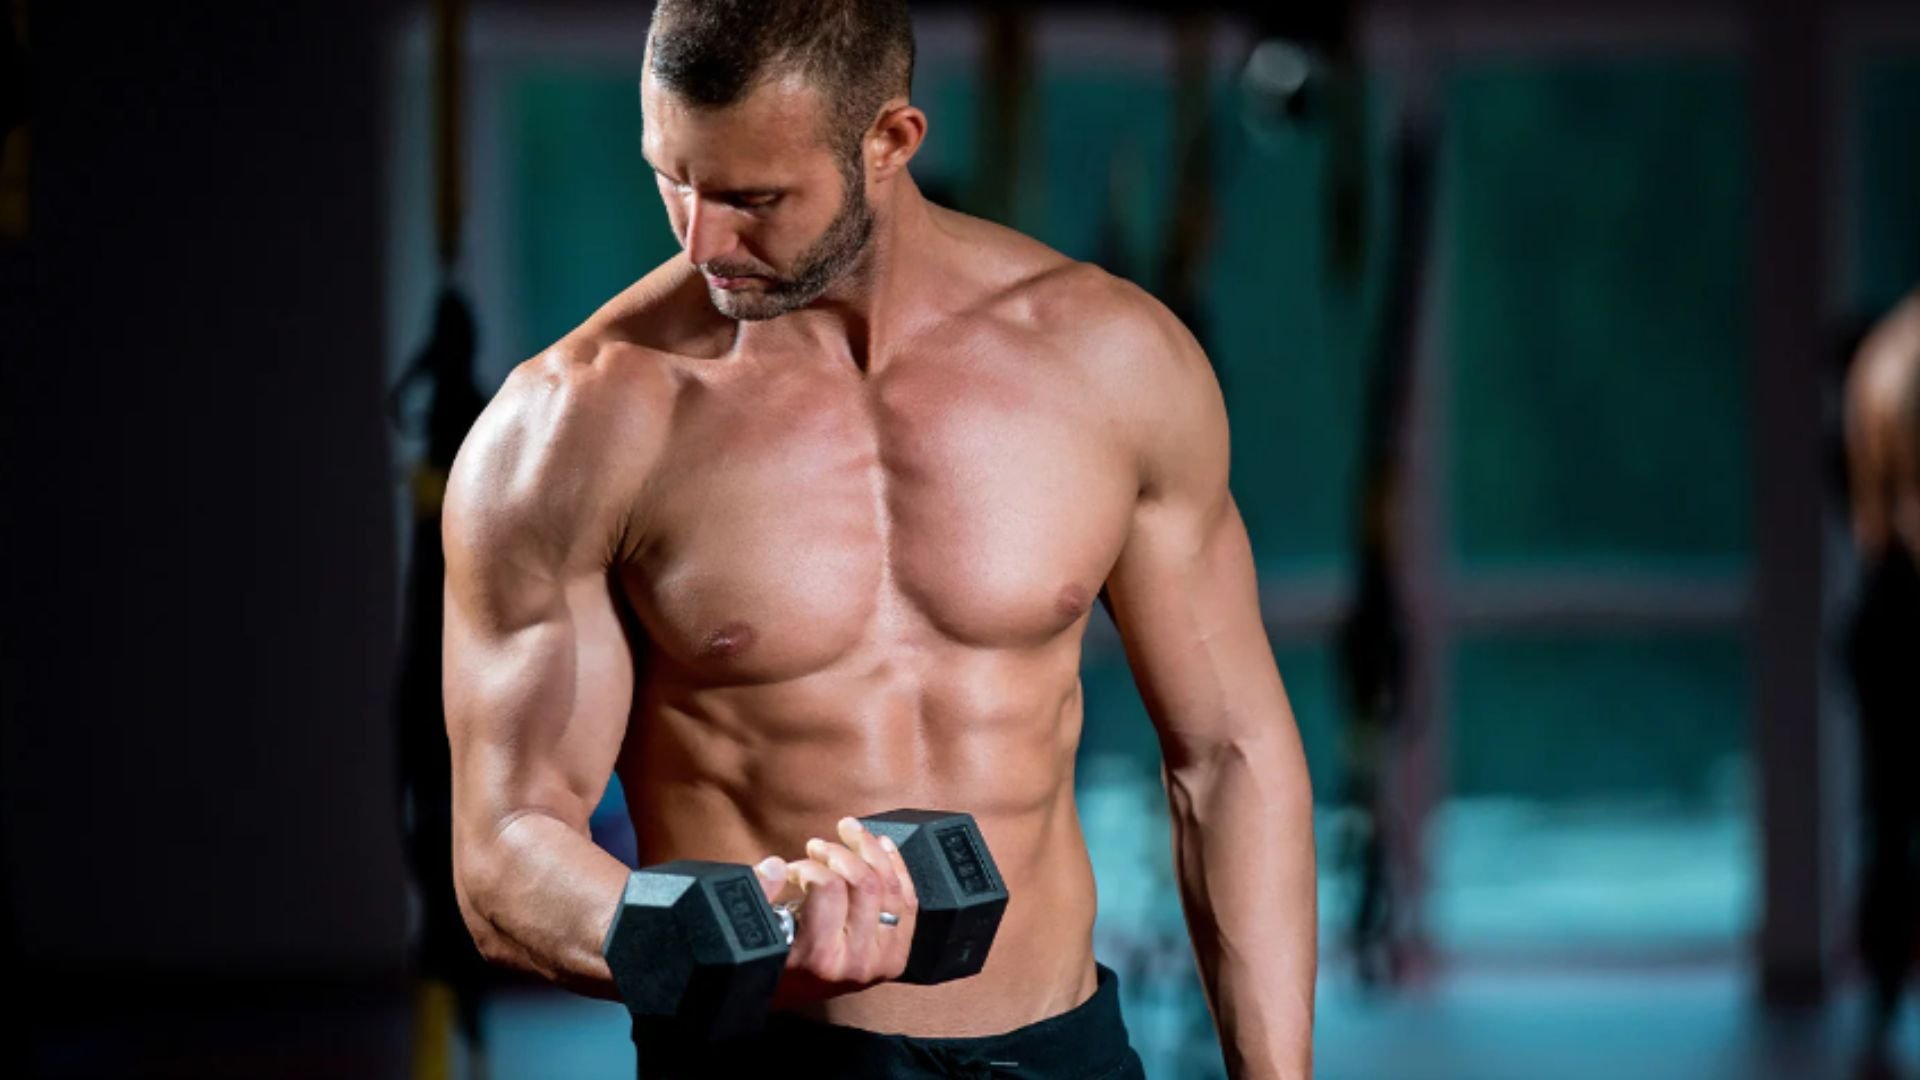 Articles Image Nandrodex 100mg for Sale Online Is the Source of Strength